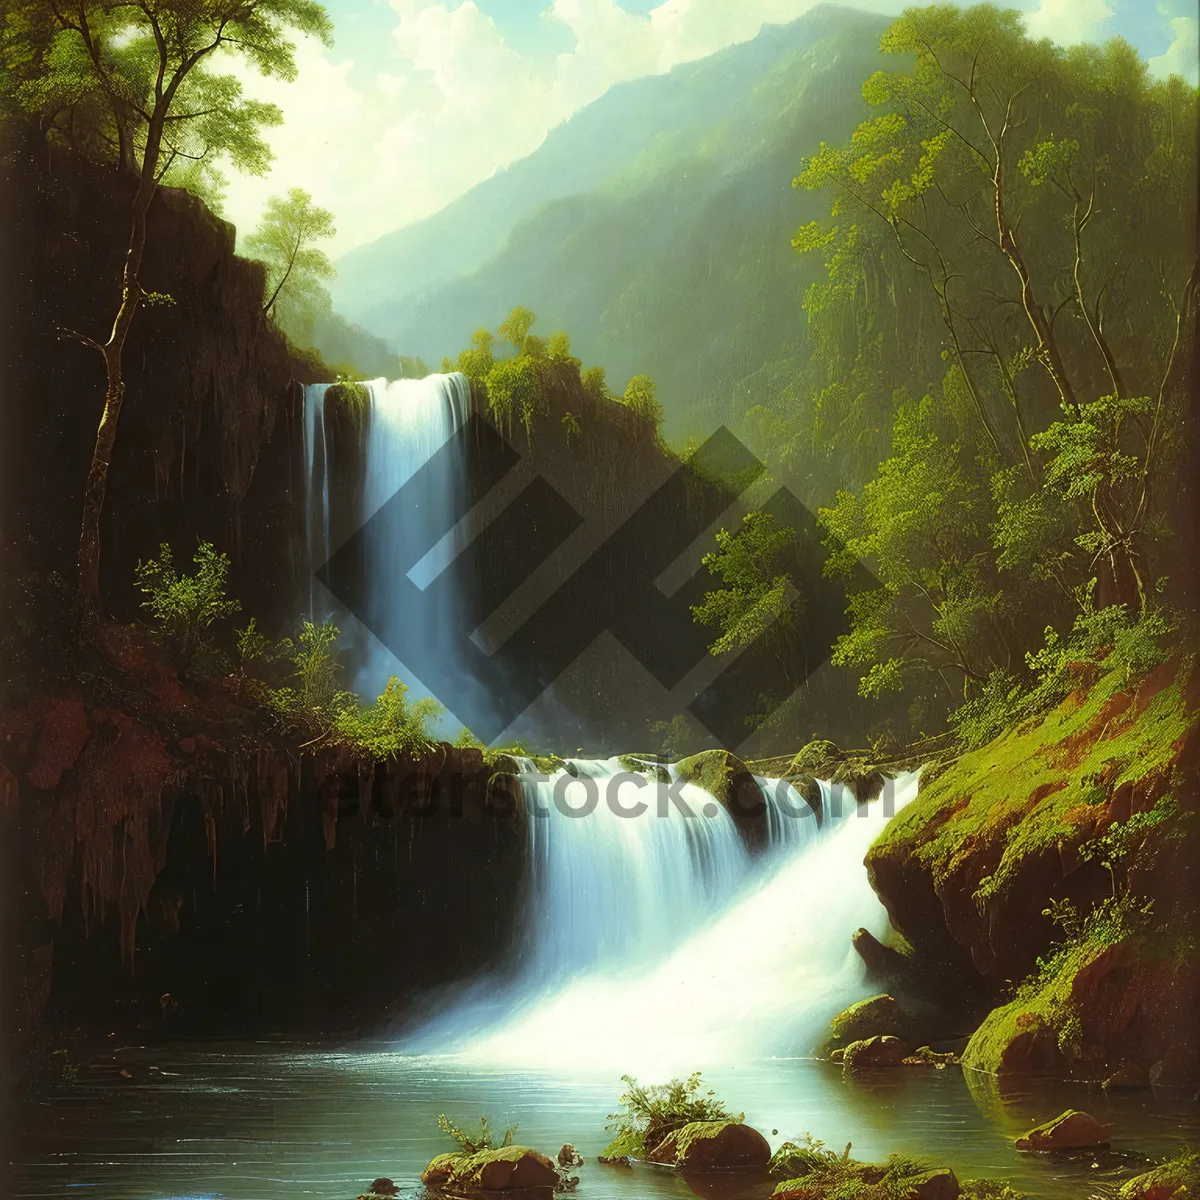 Picture of Wild River Serenity: Majestic Waterfall in Scenic Forest Ravine